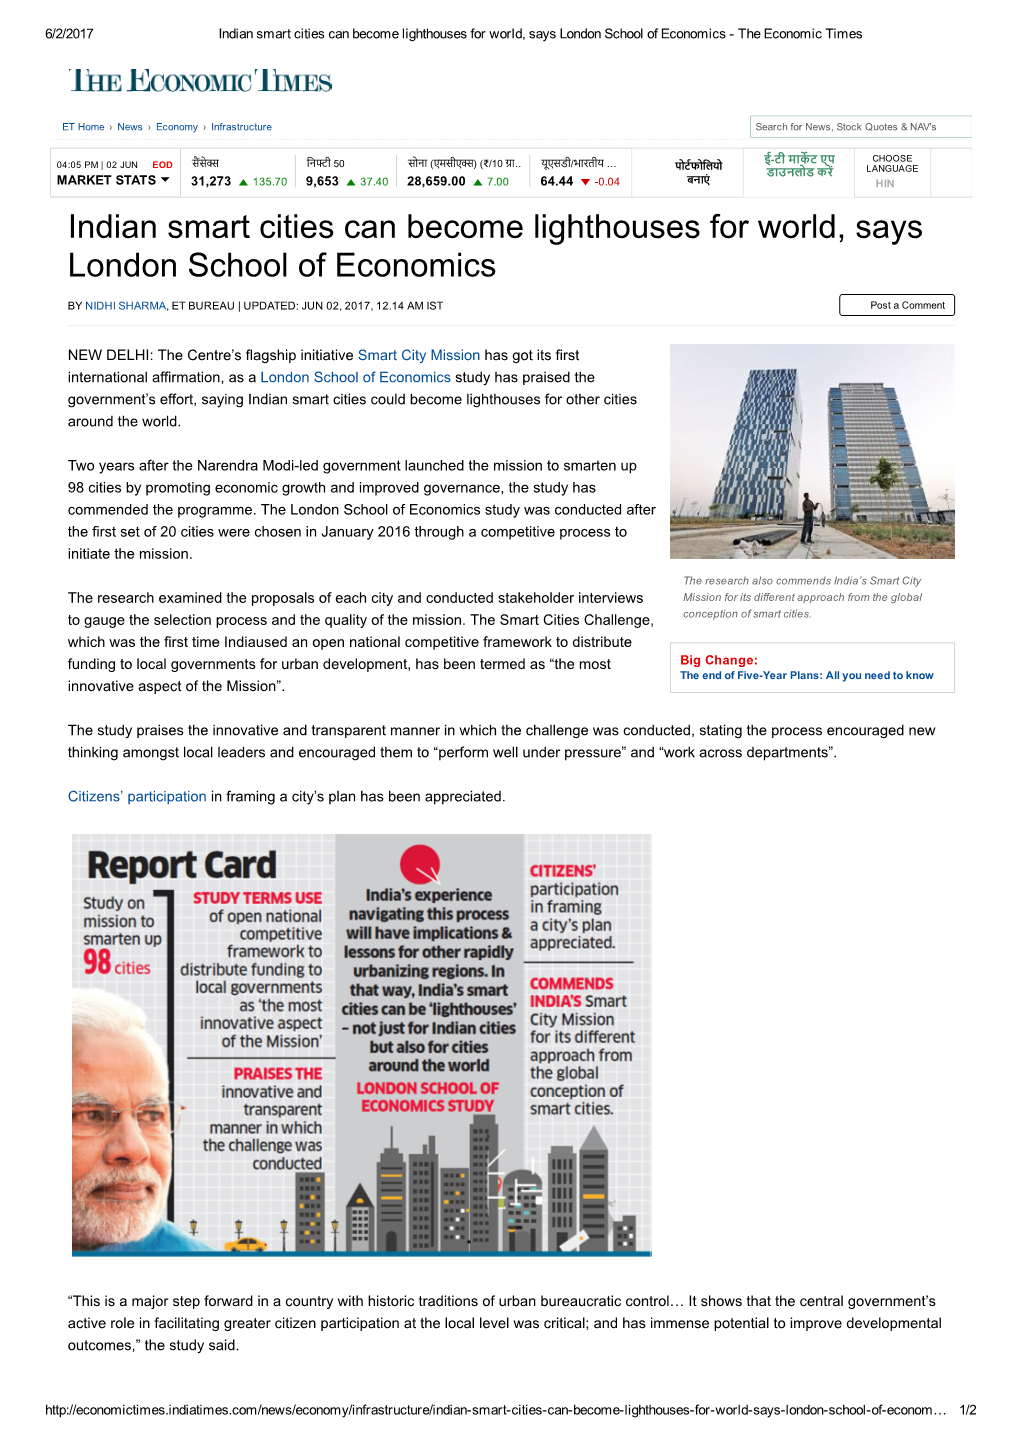 Indian Smart Cities Can Become Lighthouses for World, Says London School of Economics ­ the Economic Times